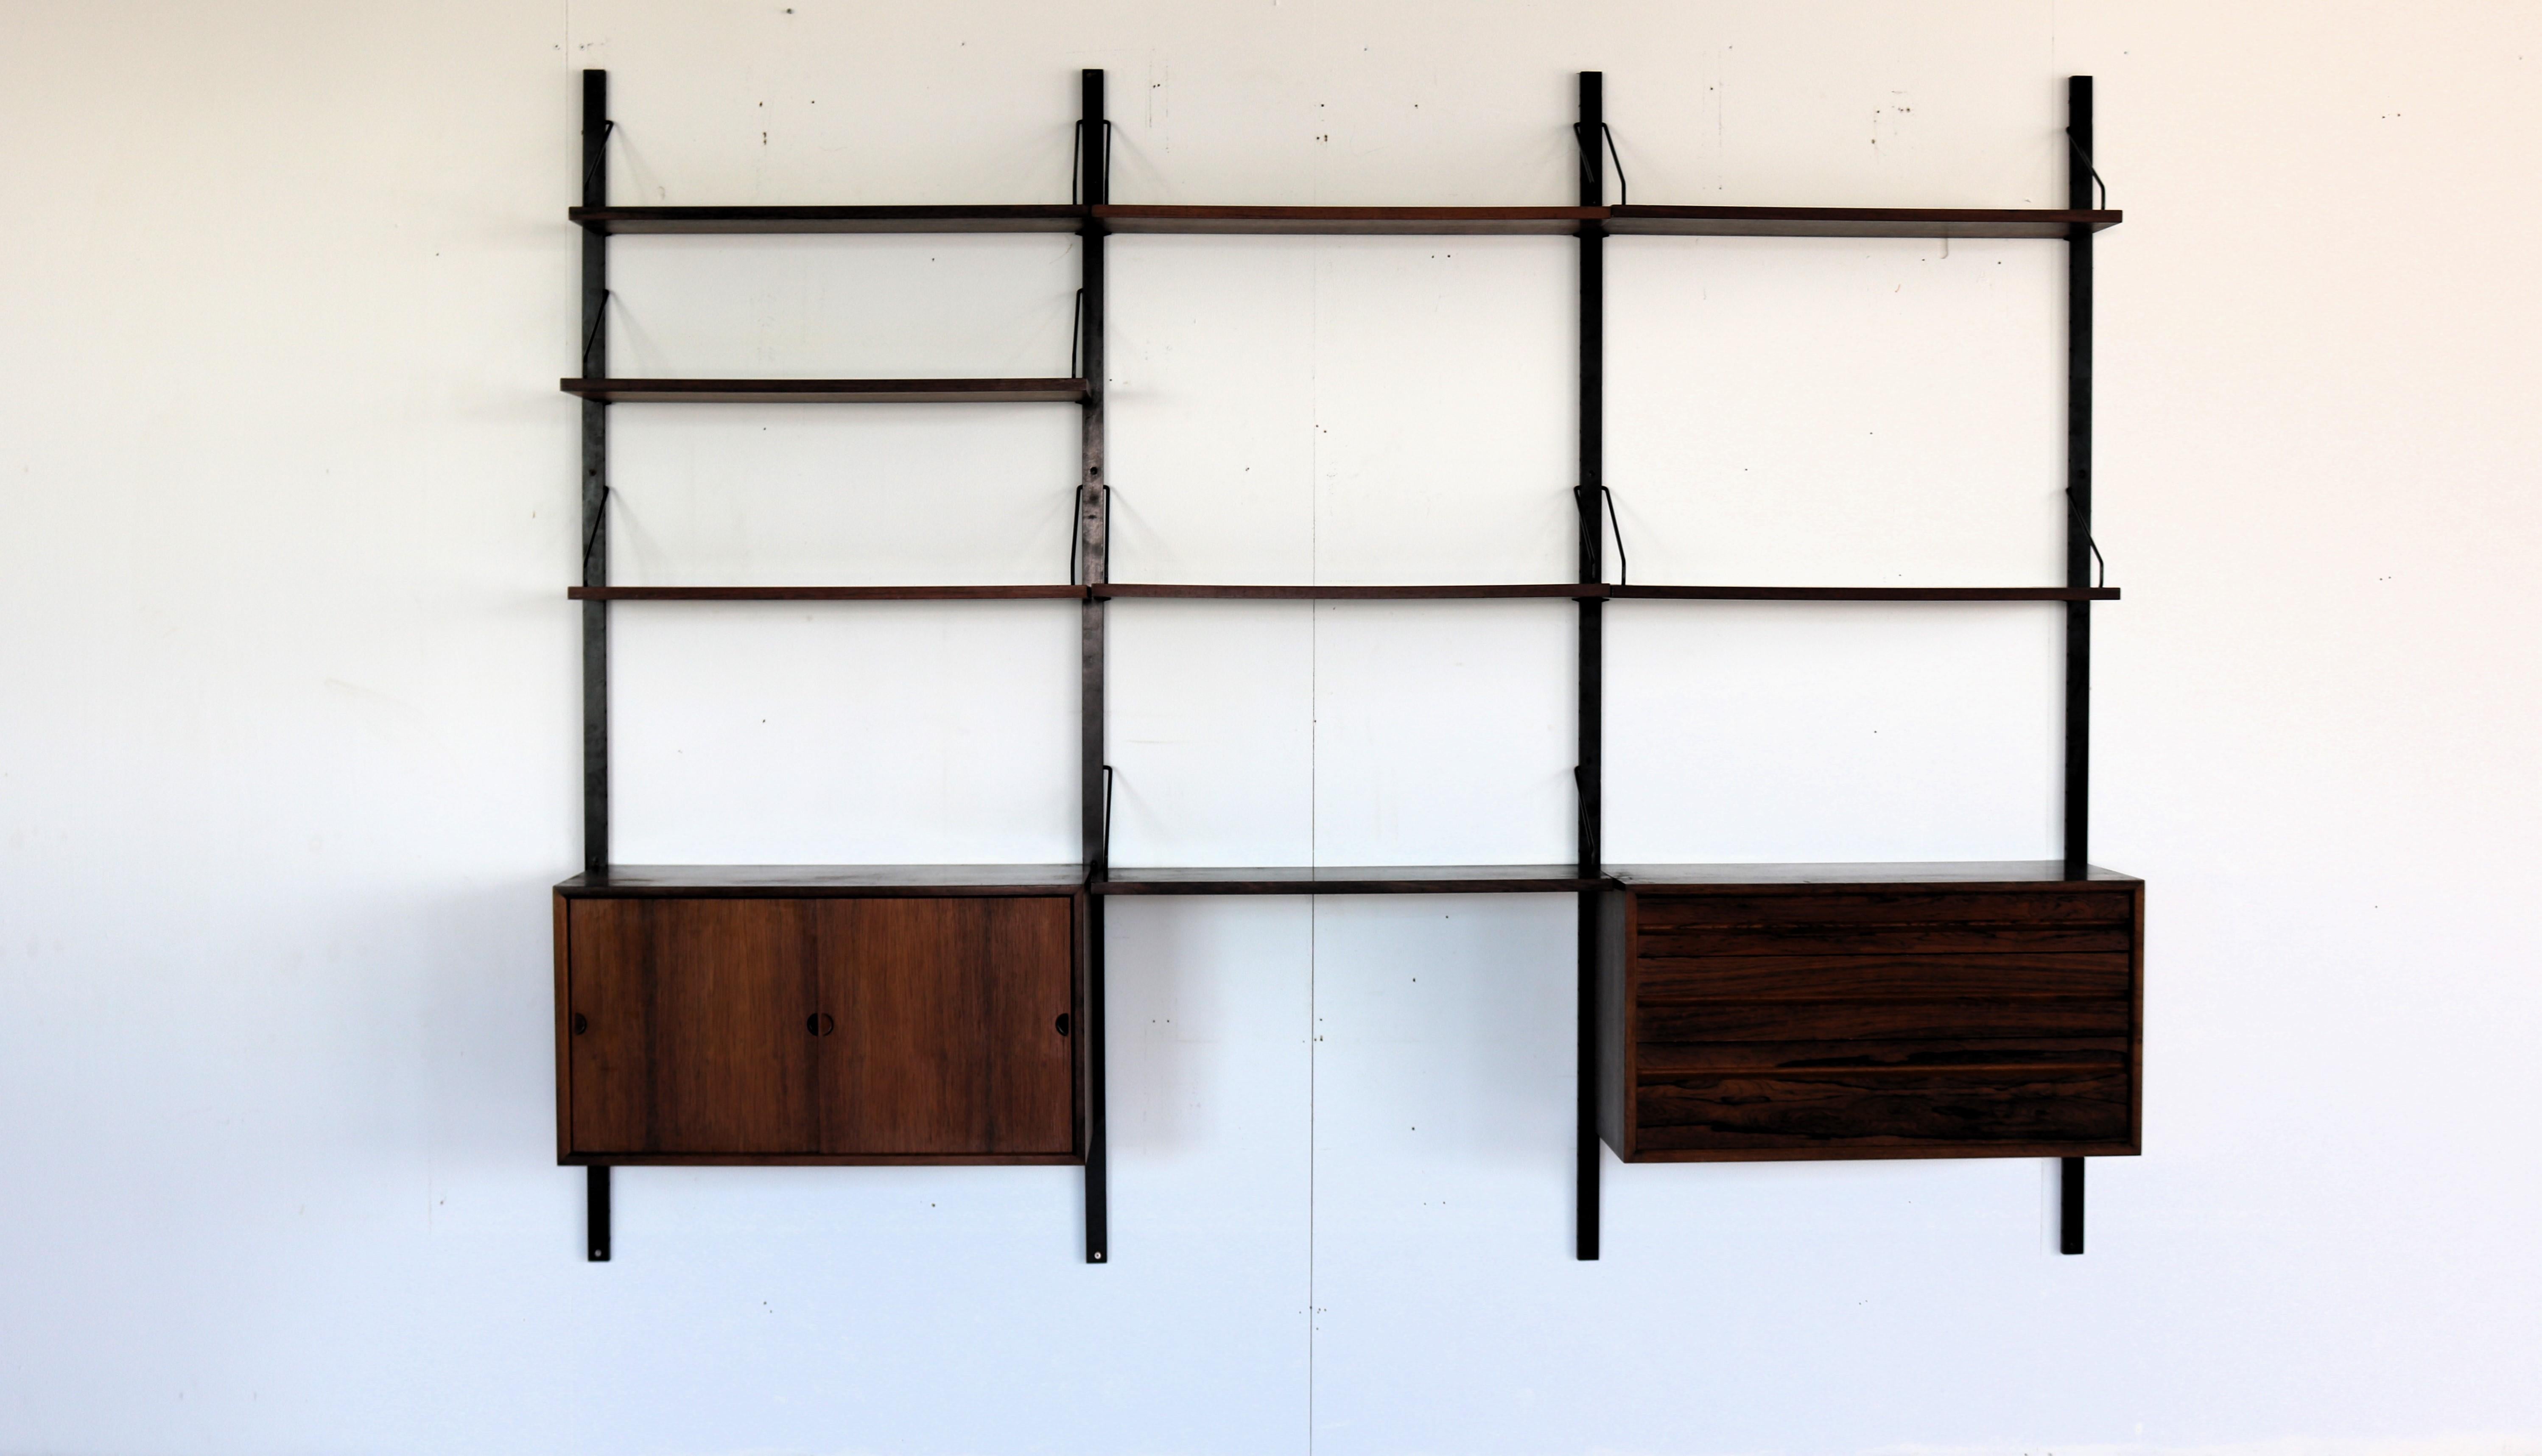 vintage wall system wall unit 60s cadovius

period 60s
designs Paul Cadovius Denmark
conditions good light signs of use

Size 192 x 244 x 38 (hxwxd)

details rosewood; metal ; modular;

article number 2039.